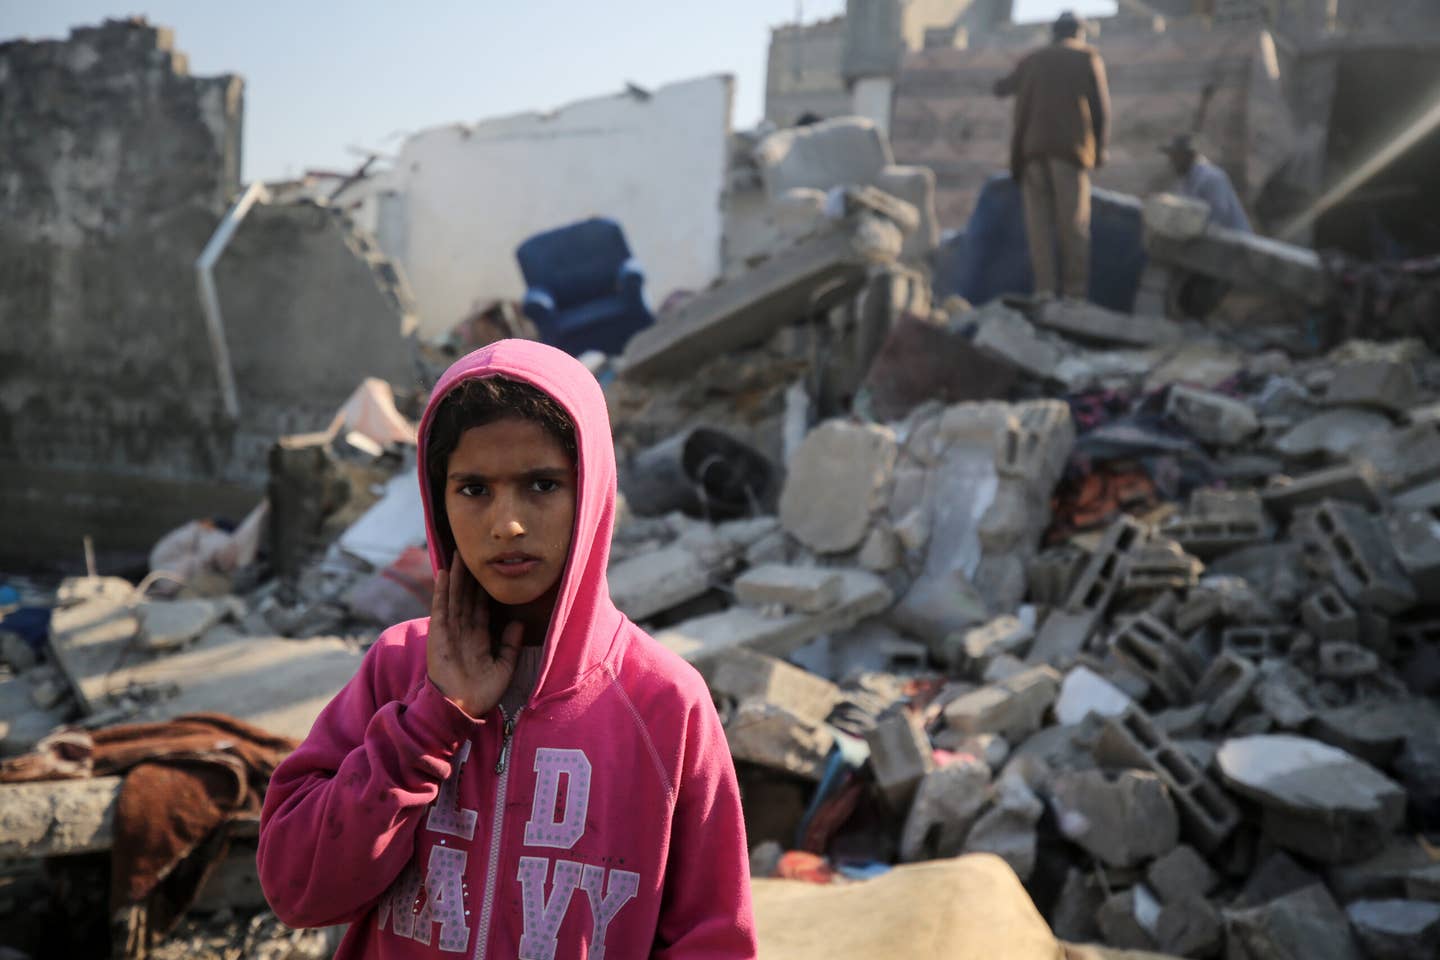 Palestinians are gathering amid the rubble of destroyed buildings following an Israeli bombardment in Deir El-Balah, in the central Gaza Strip, on December 19, 2023, as battles between Israel and the Palestinian militant group Hamas continue. (Photo by Majdi Fathi/NurPhoto via Getty Images)